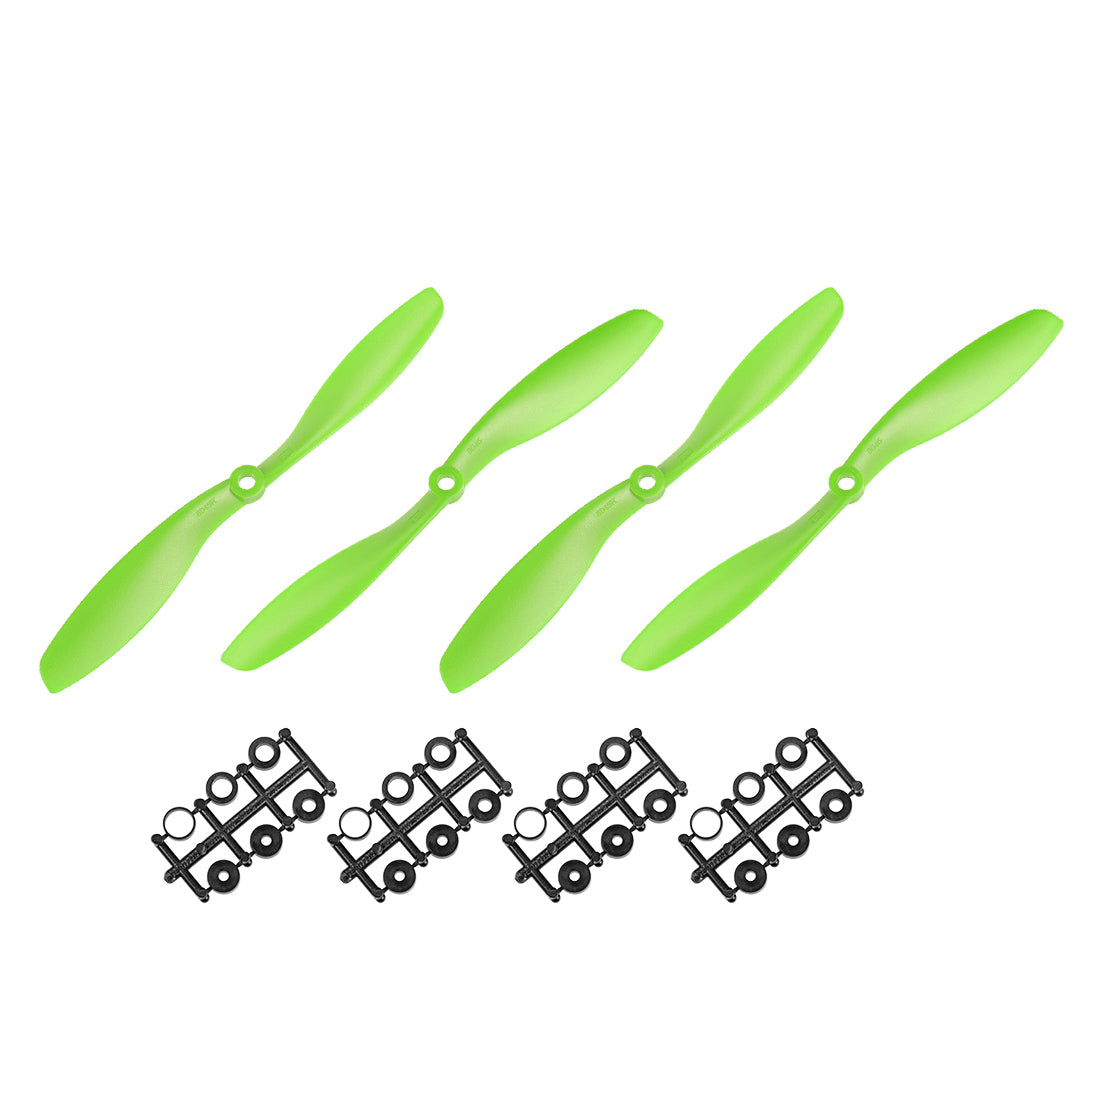 uxcell Uxcell RC Propellers CW CCW 8045 8x4.5 Inch 2-Vane Fixed-Wing, Nylon Green 2 Pair with Adapter Rings